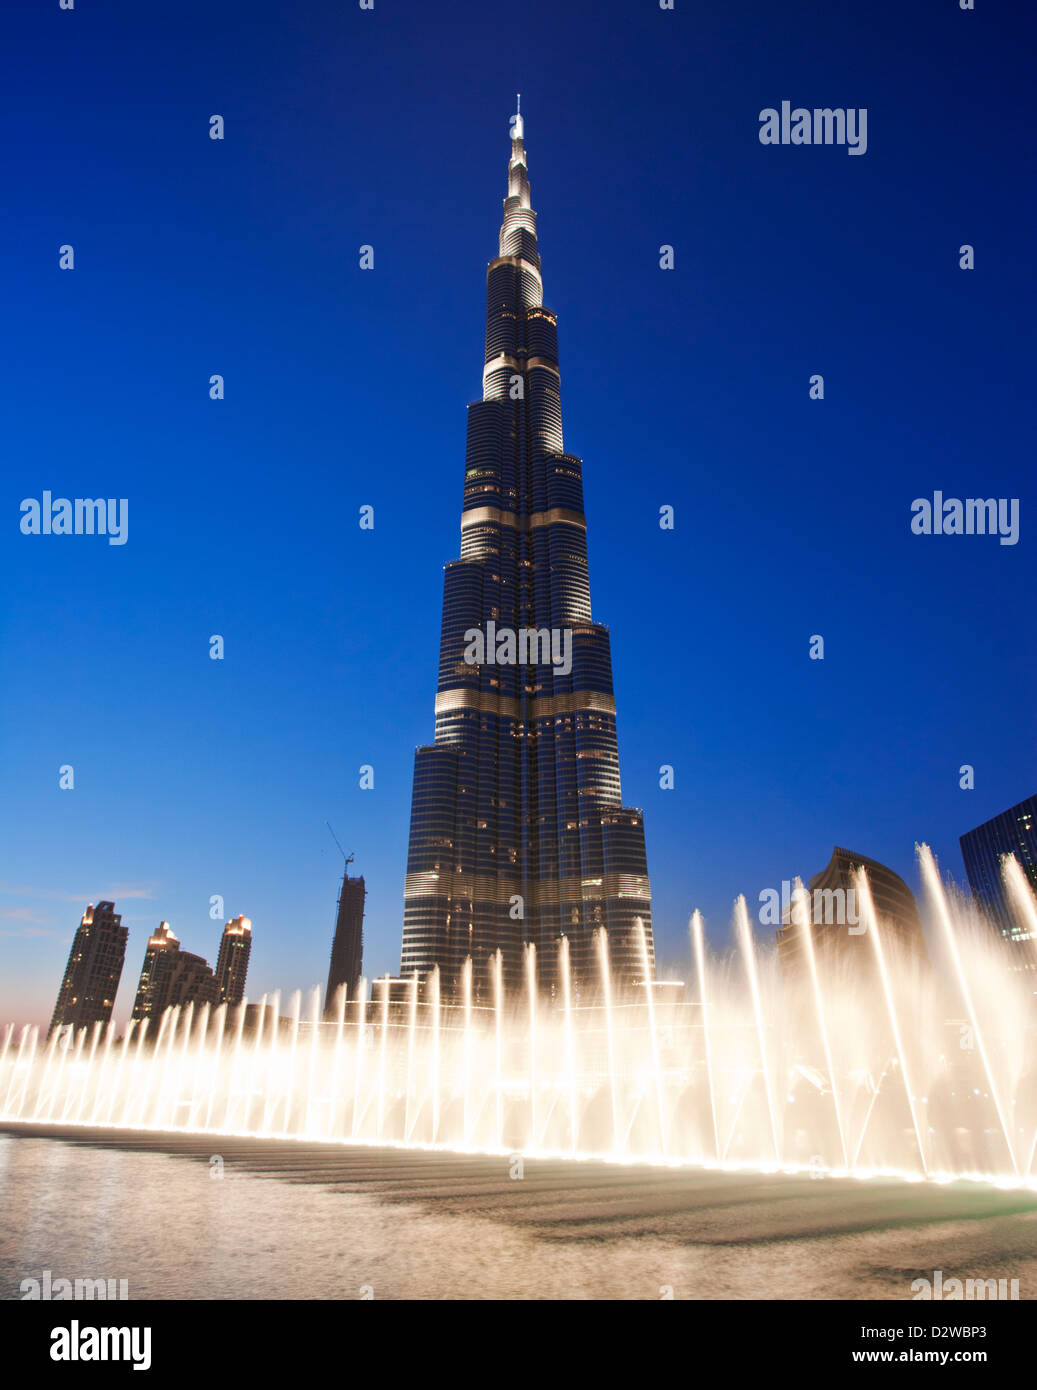 Fountain show in front of the Burj Khalifa, with its 828 meters height it is the tallest building in the world, Dubai, UAE. Stock Photo